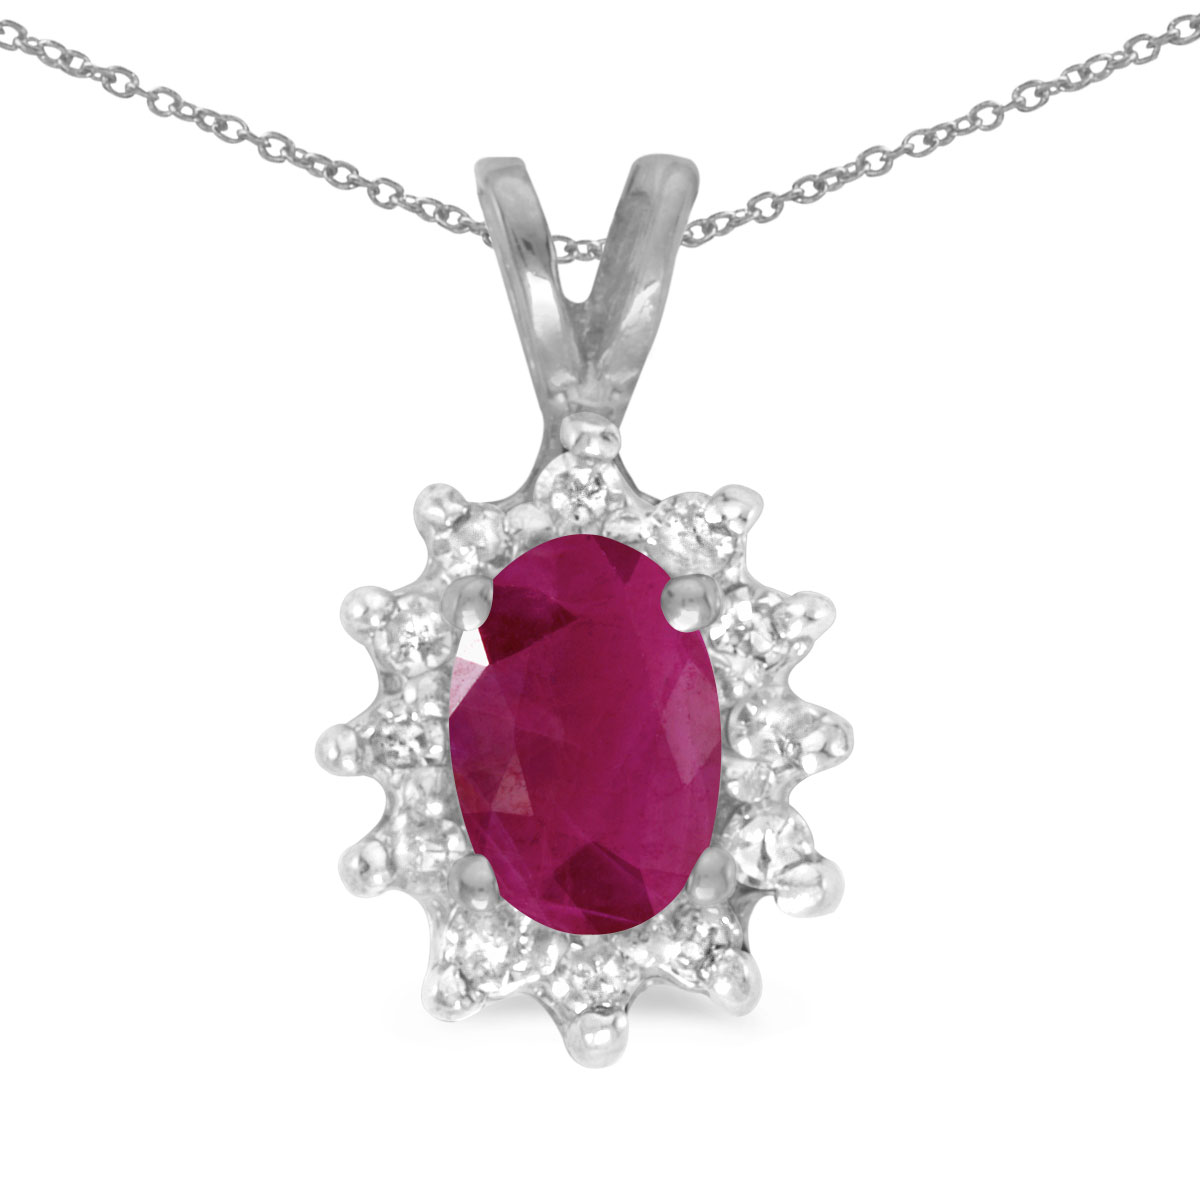 JCX2748: This 14k white gold oval ruby and diamond pendant features a 6x4 mm genuine natural ruby with a 0.36 ct total weight.